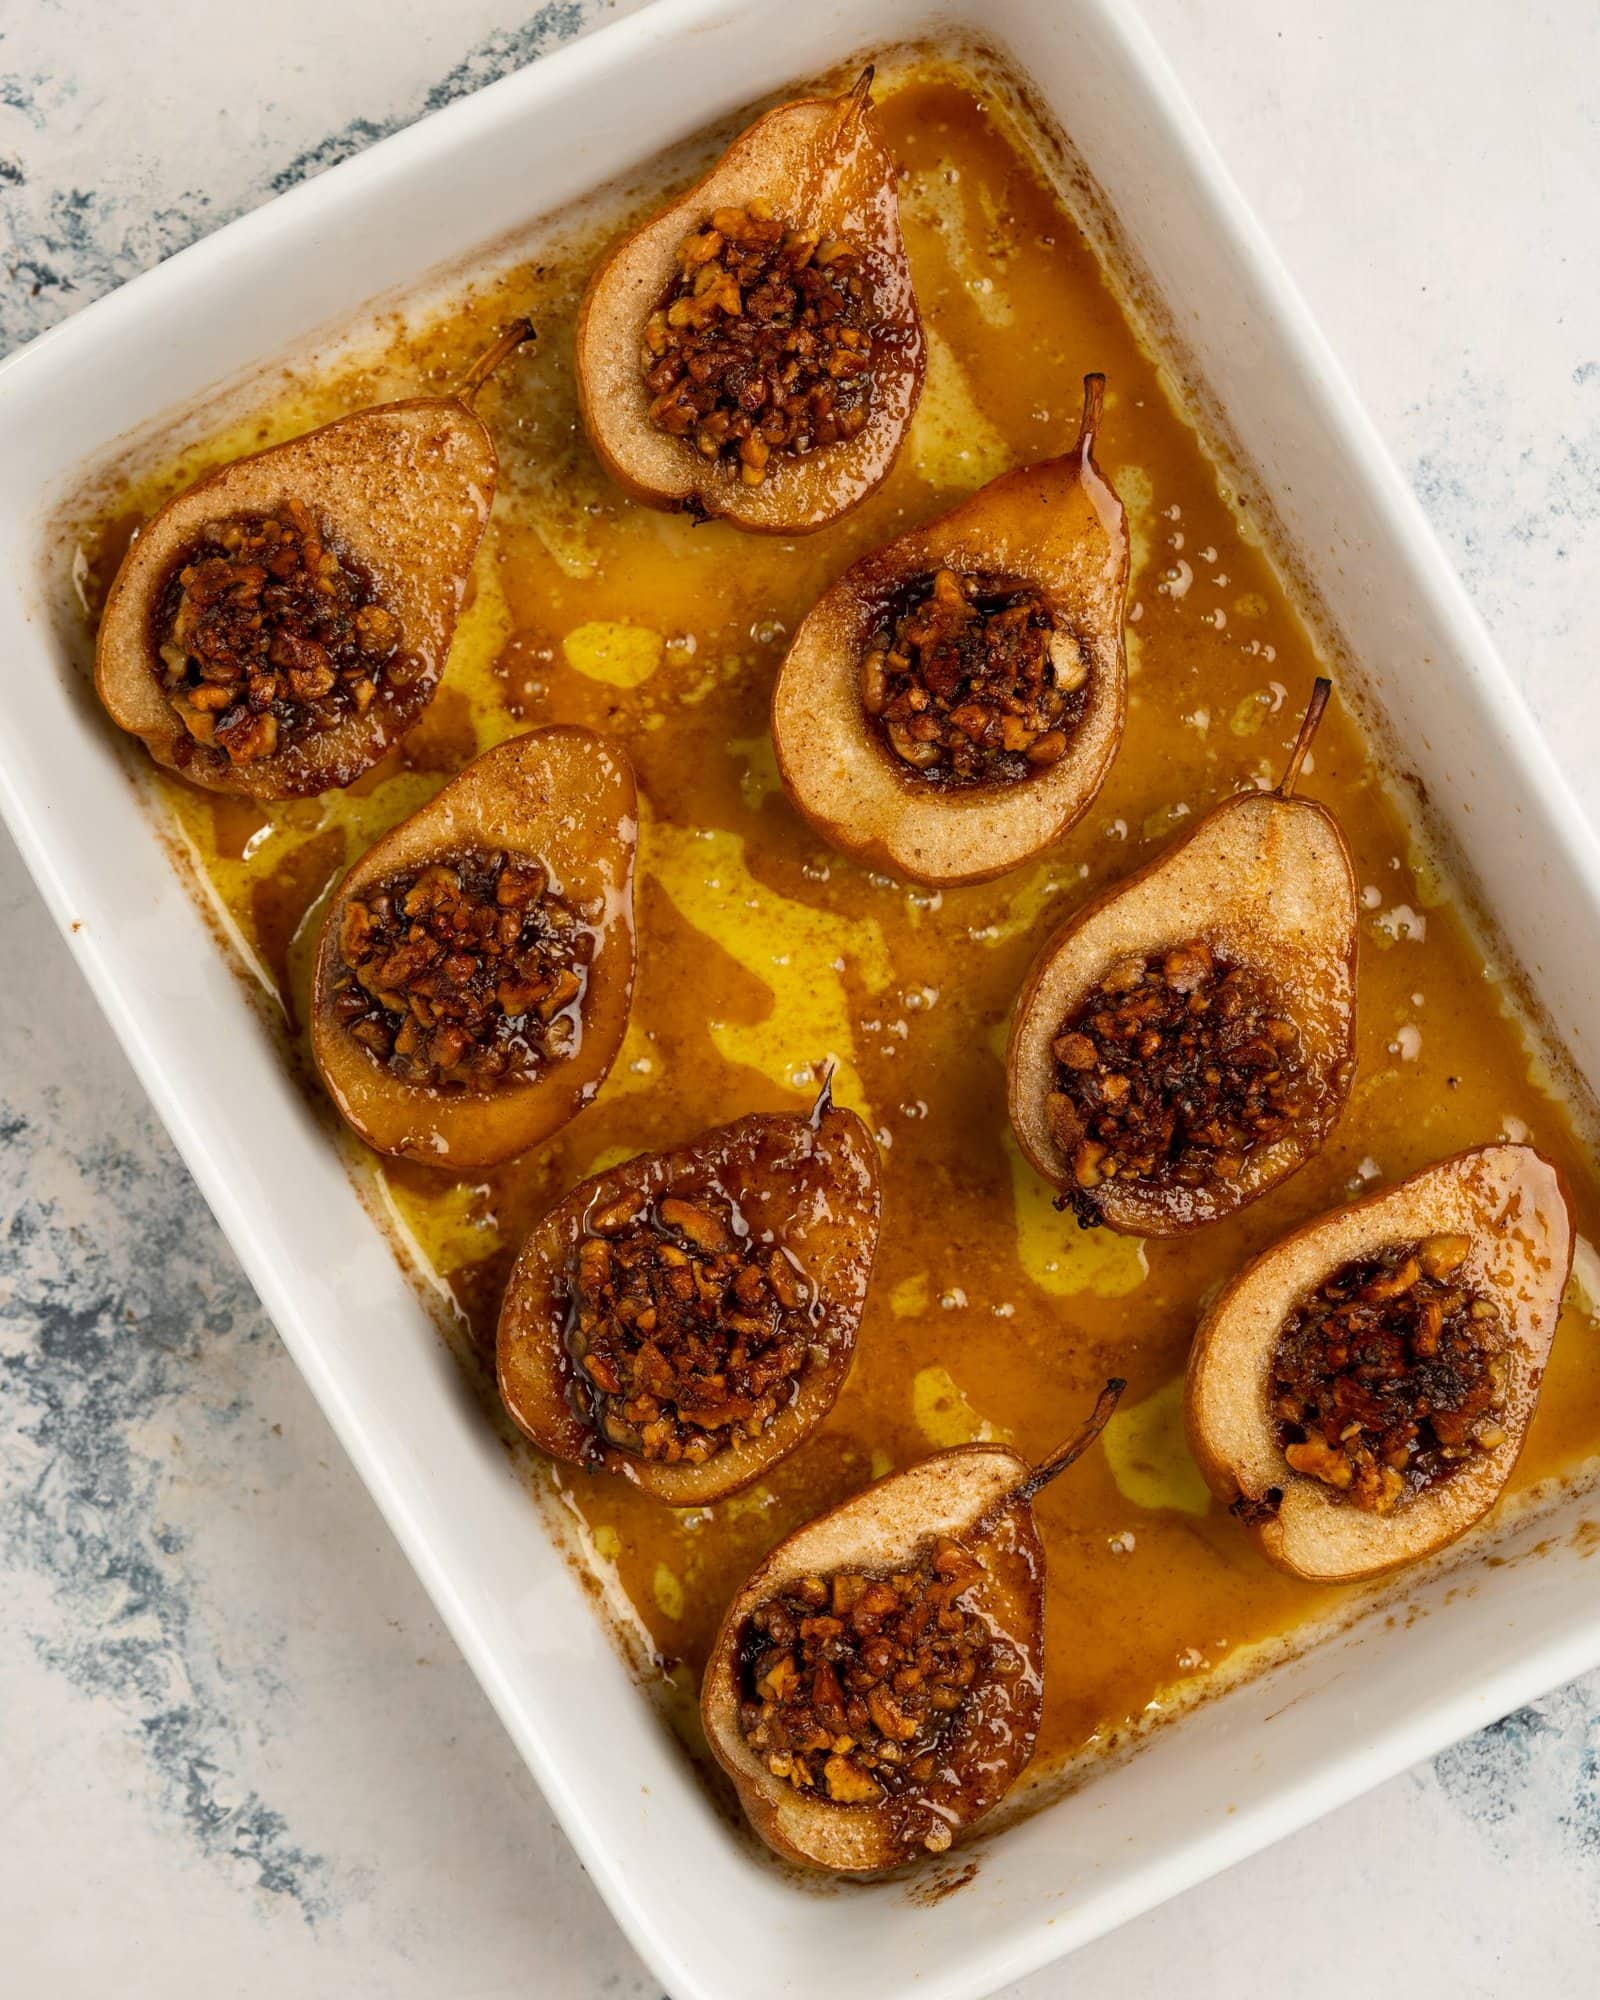 Pears baked with crunch walnut mix in its core with a caramelized sauce in the tray.